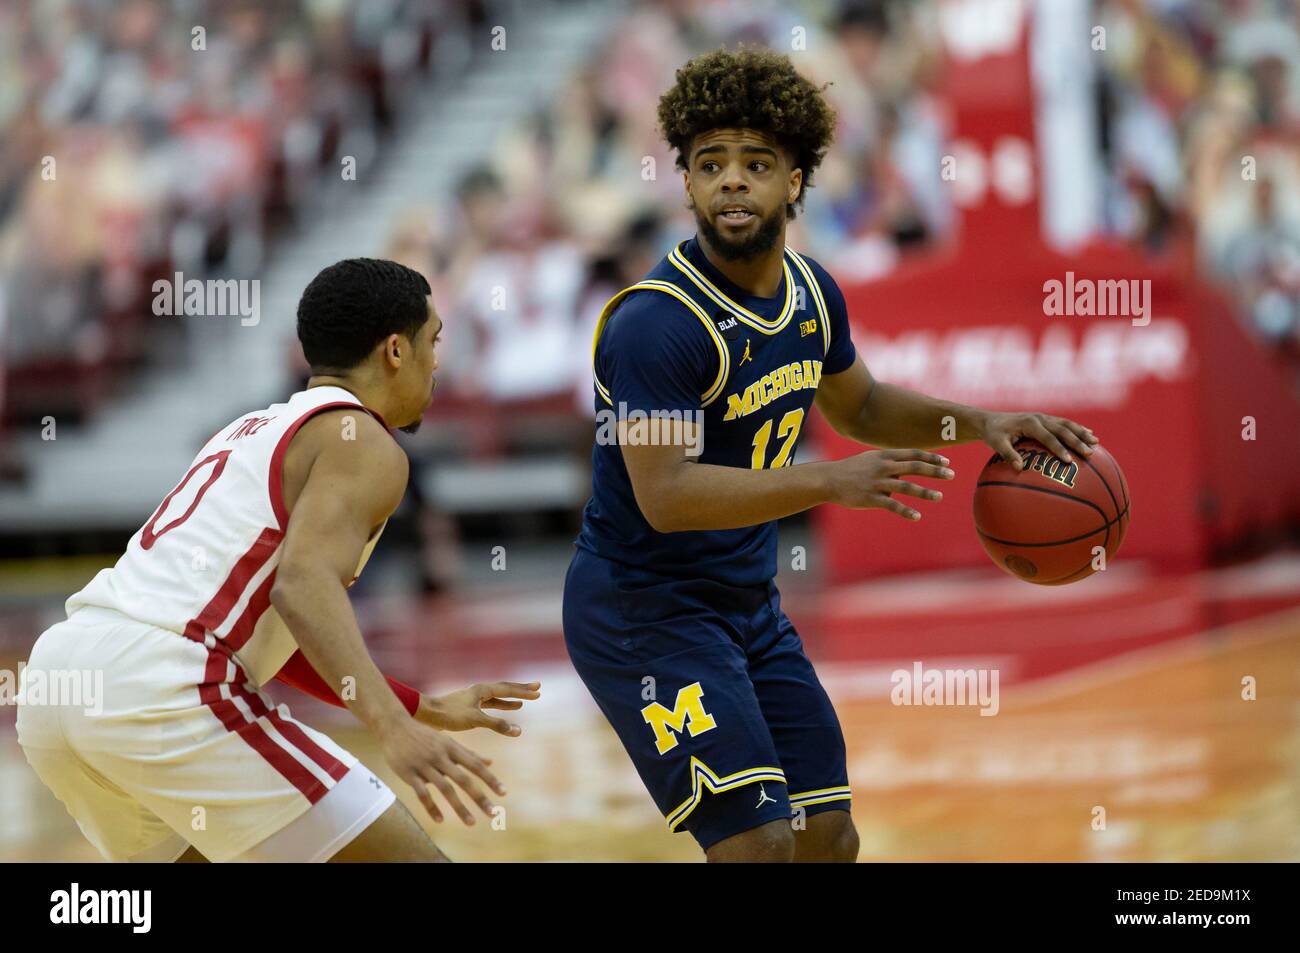 Madison, WI, USA. 14th Feb, 2021. Michigan Wolverines guard Mike Smith #12 during the NCAA basketball game between the Michigan Wolverines and the Wisconsin Badgers at the Kohl Center in Madison, WI. John Fisher/CSM/Alamy Live News Stock Photo